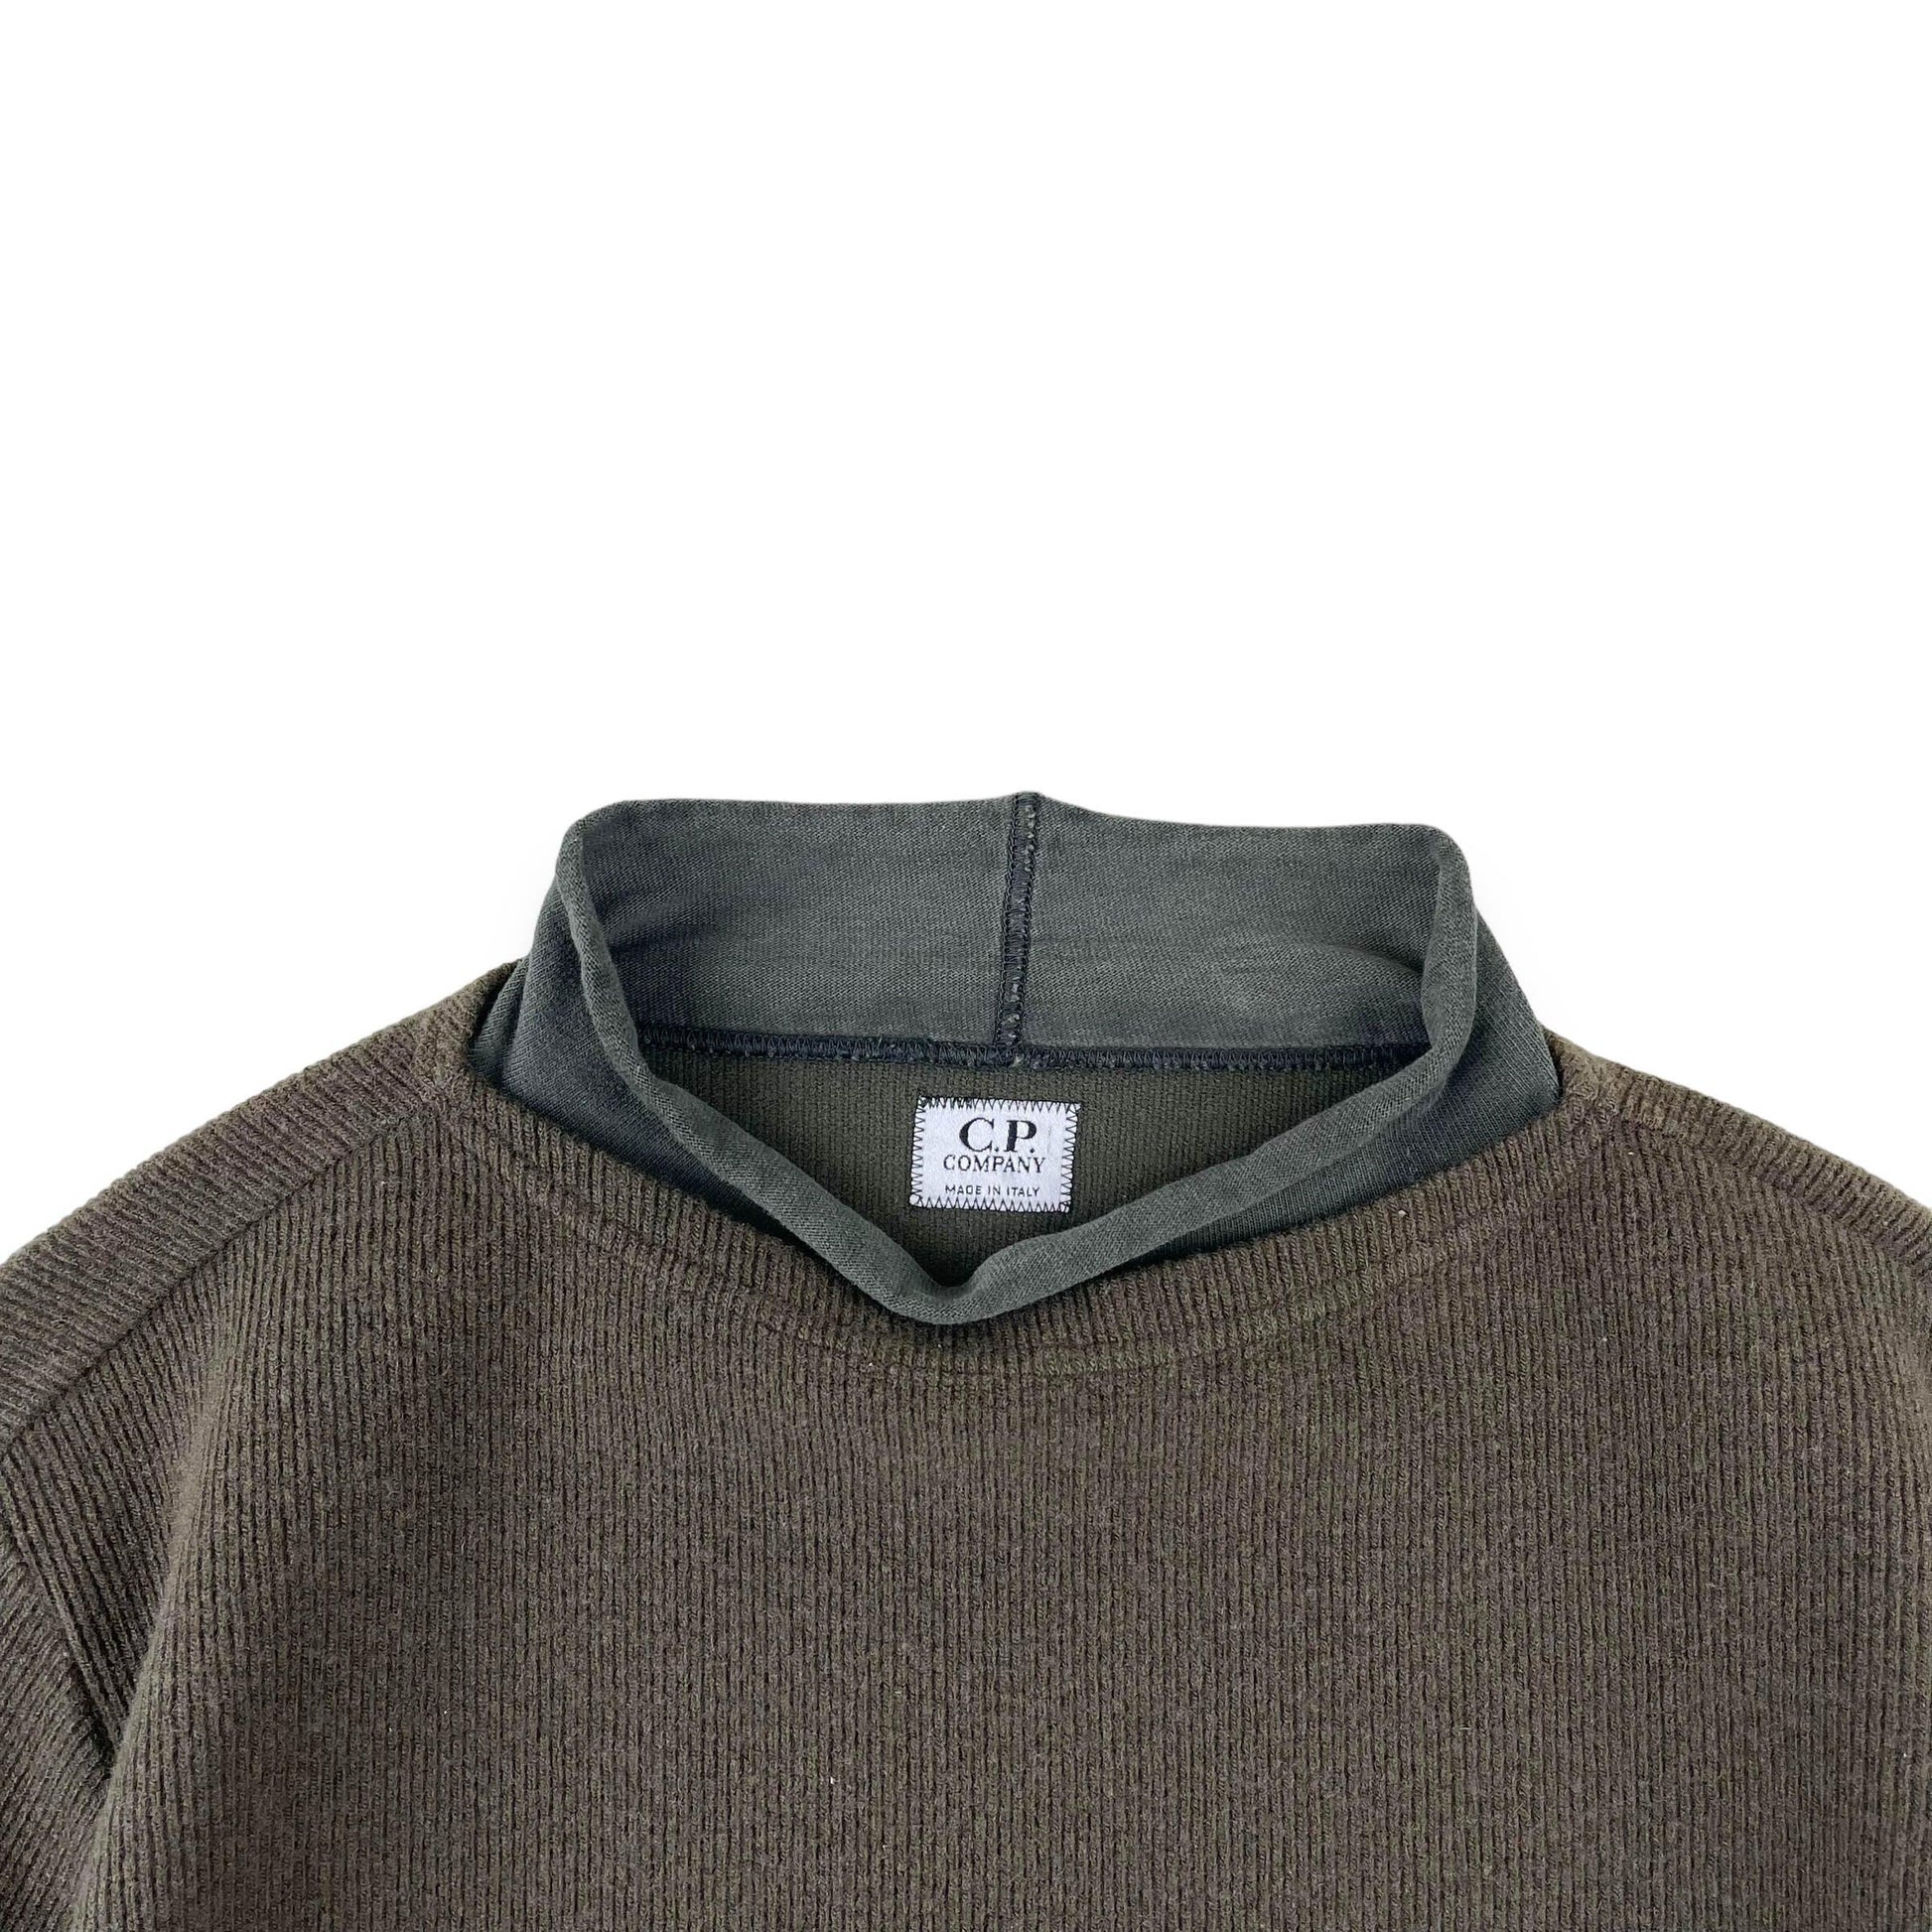 Vintage CP Company Jumper (M) - Known Source